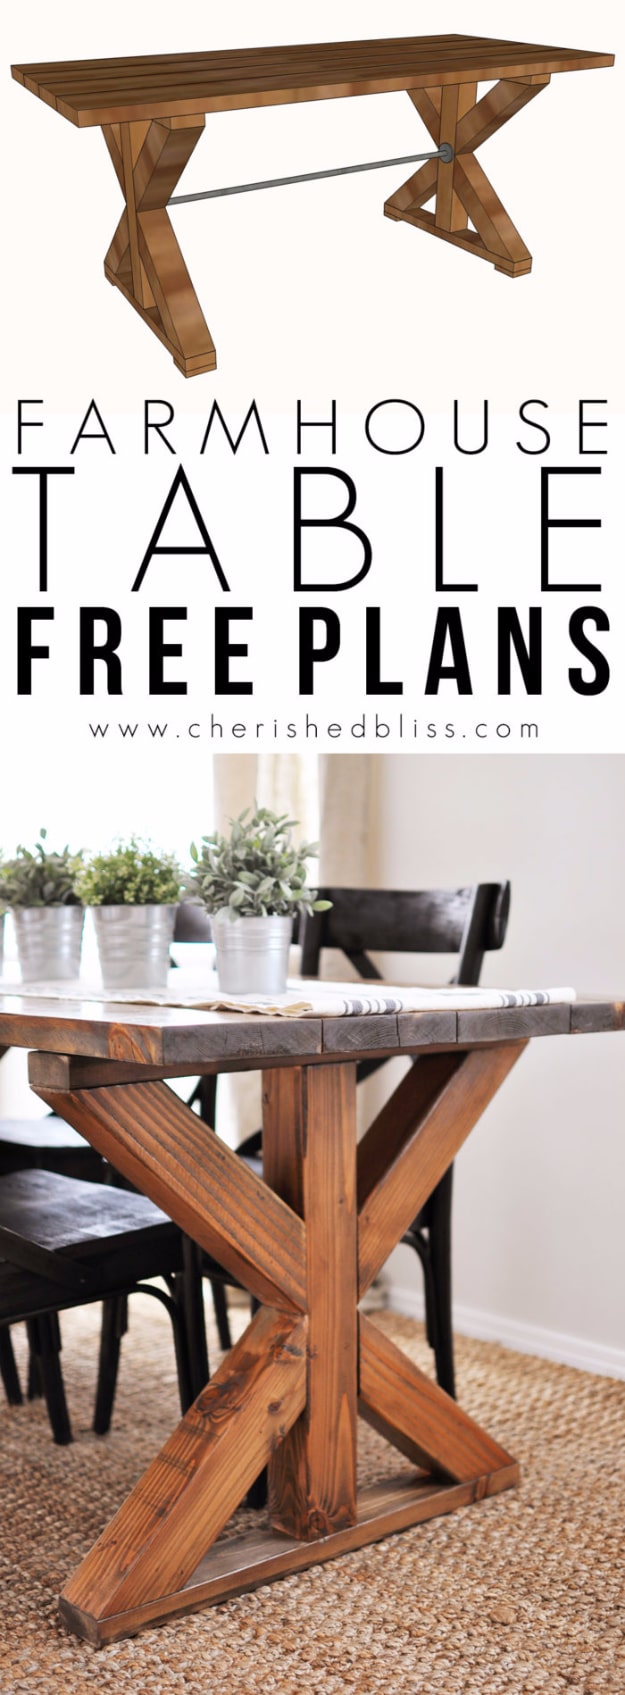 DIY Dining Room Table Projects - X Brace Farmhouse Table - Creative Do It Yourself Tables and Ideas You Can Make For Your Kitchen or Dining Area. Easy Step by Step Tutorials that Are Perfect For Those On A Budget http://diyjoy.com/diy-dining-room-table-projects